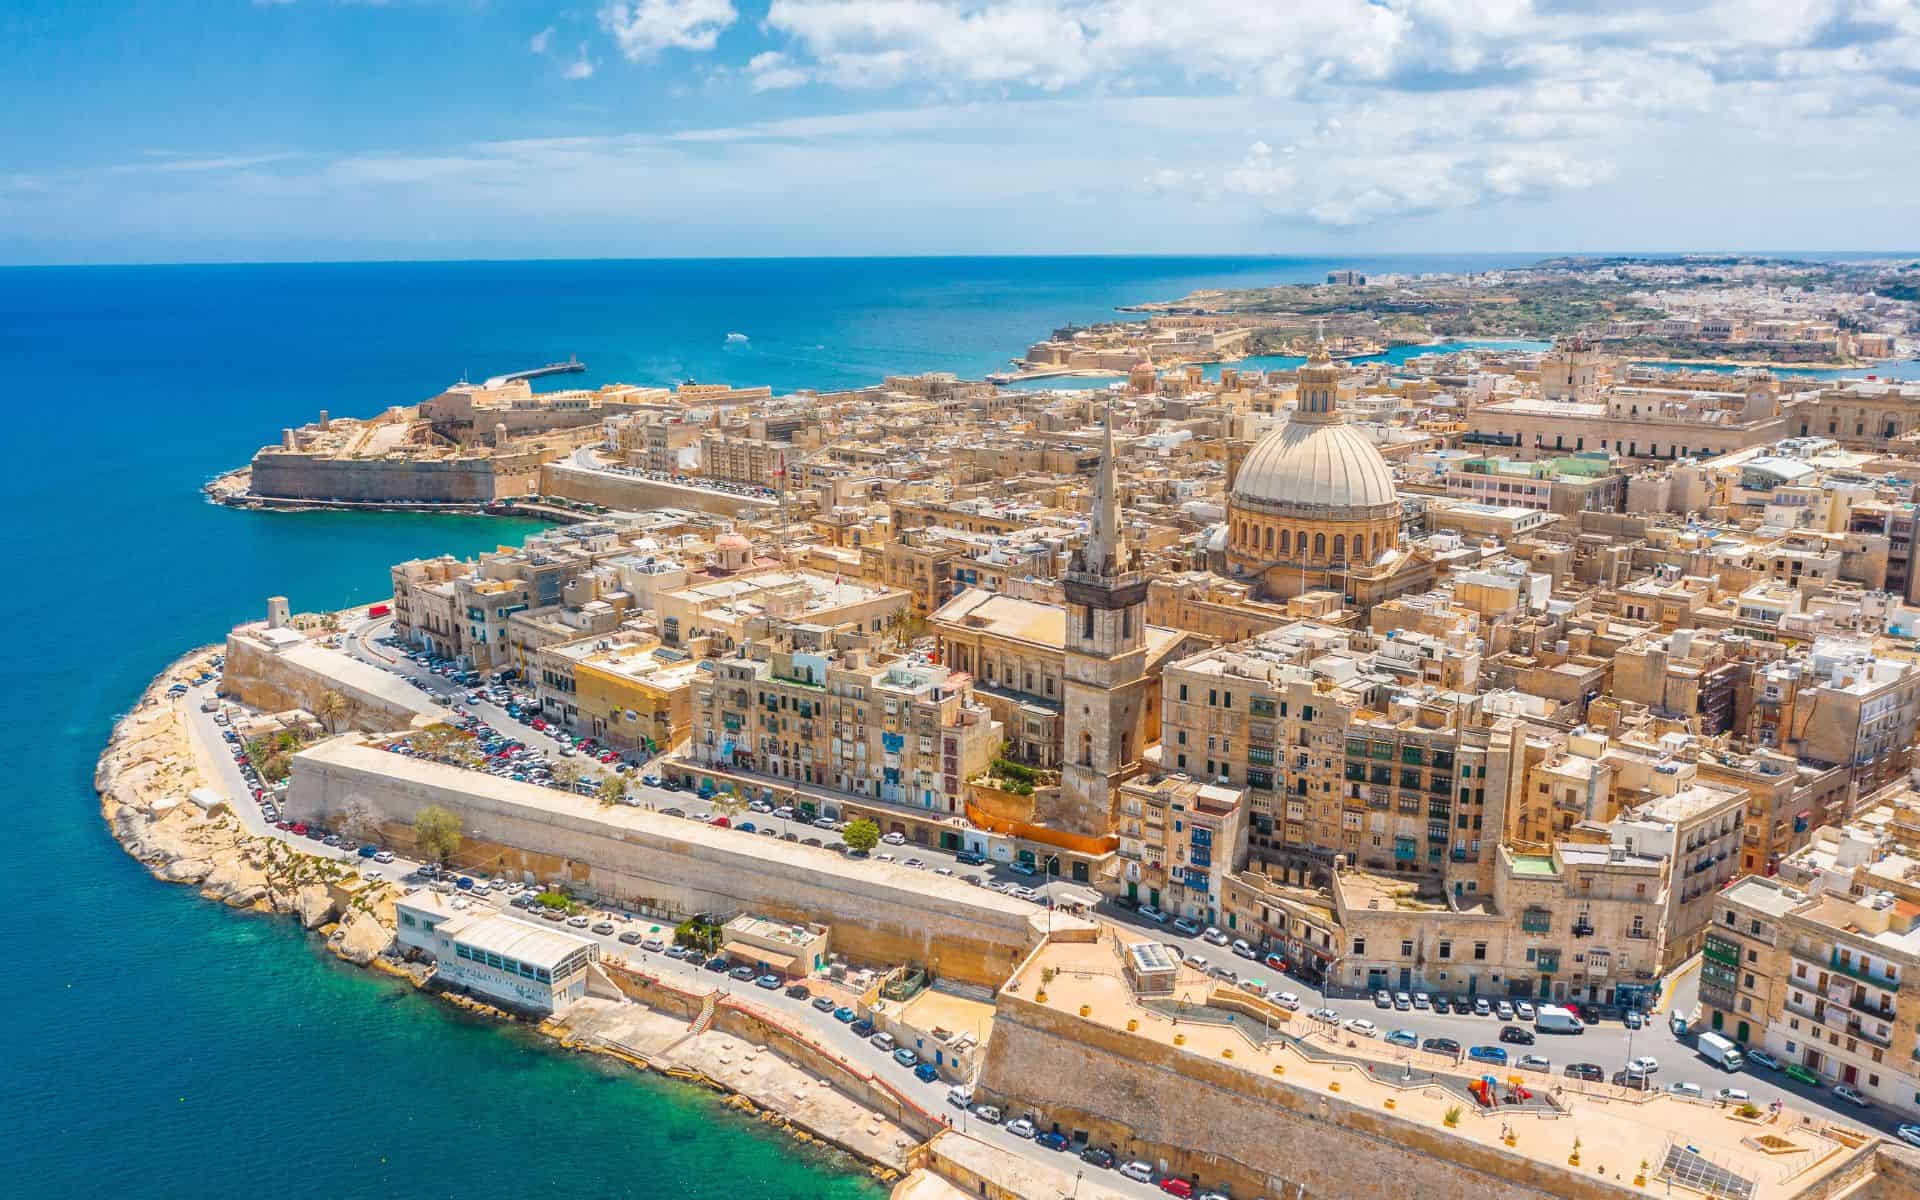 Spending 4 days in Malta? Our guide offers top locations, day trip itinerary, and transport tips for an unforgettable holiday on these captivating islands.